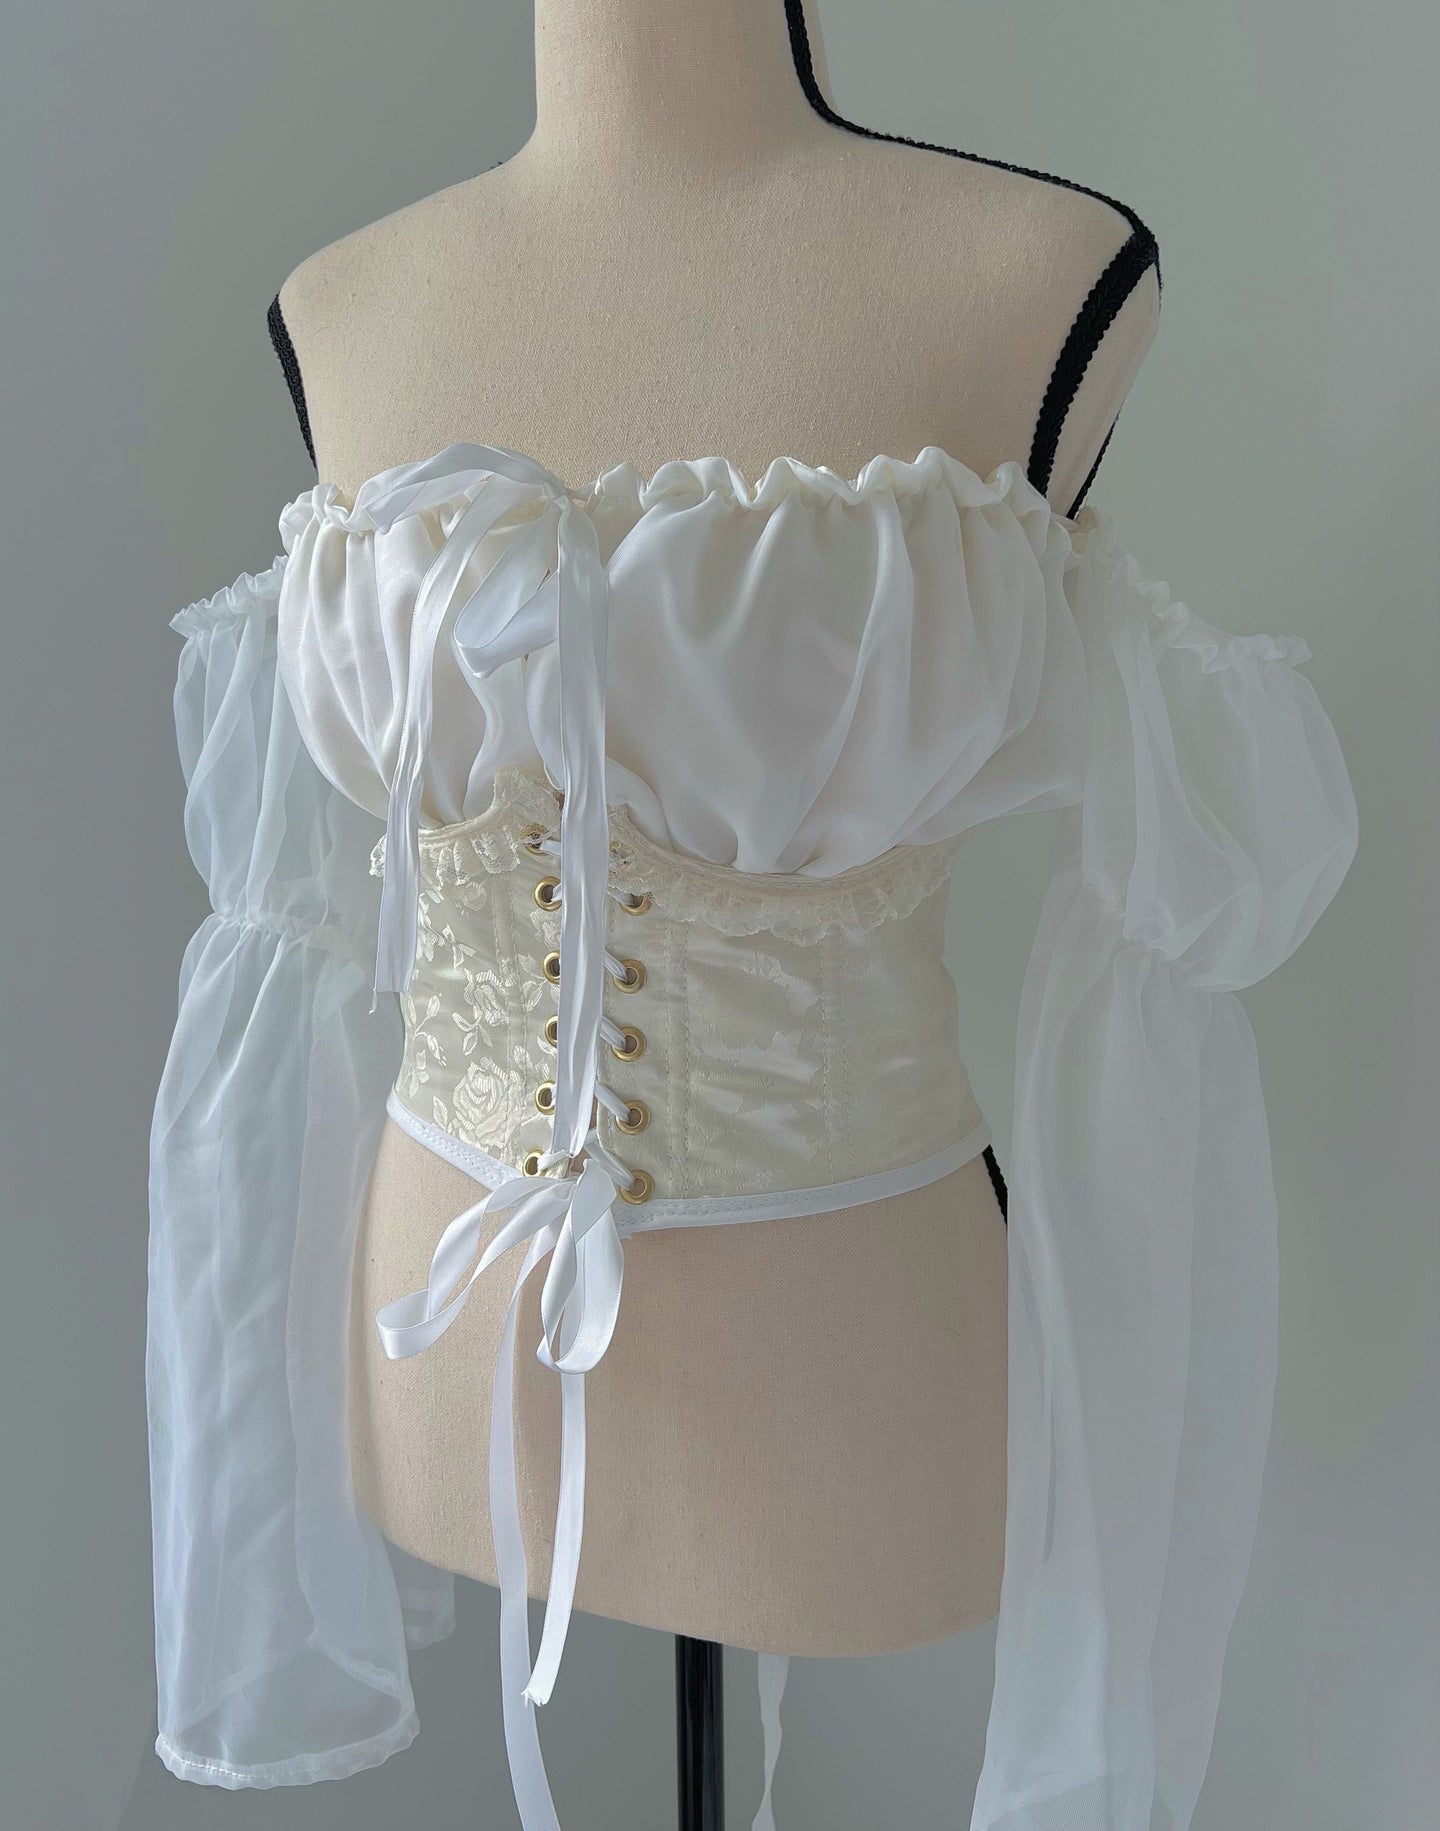 Marie corset with built-in blouse